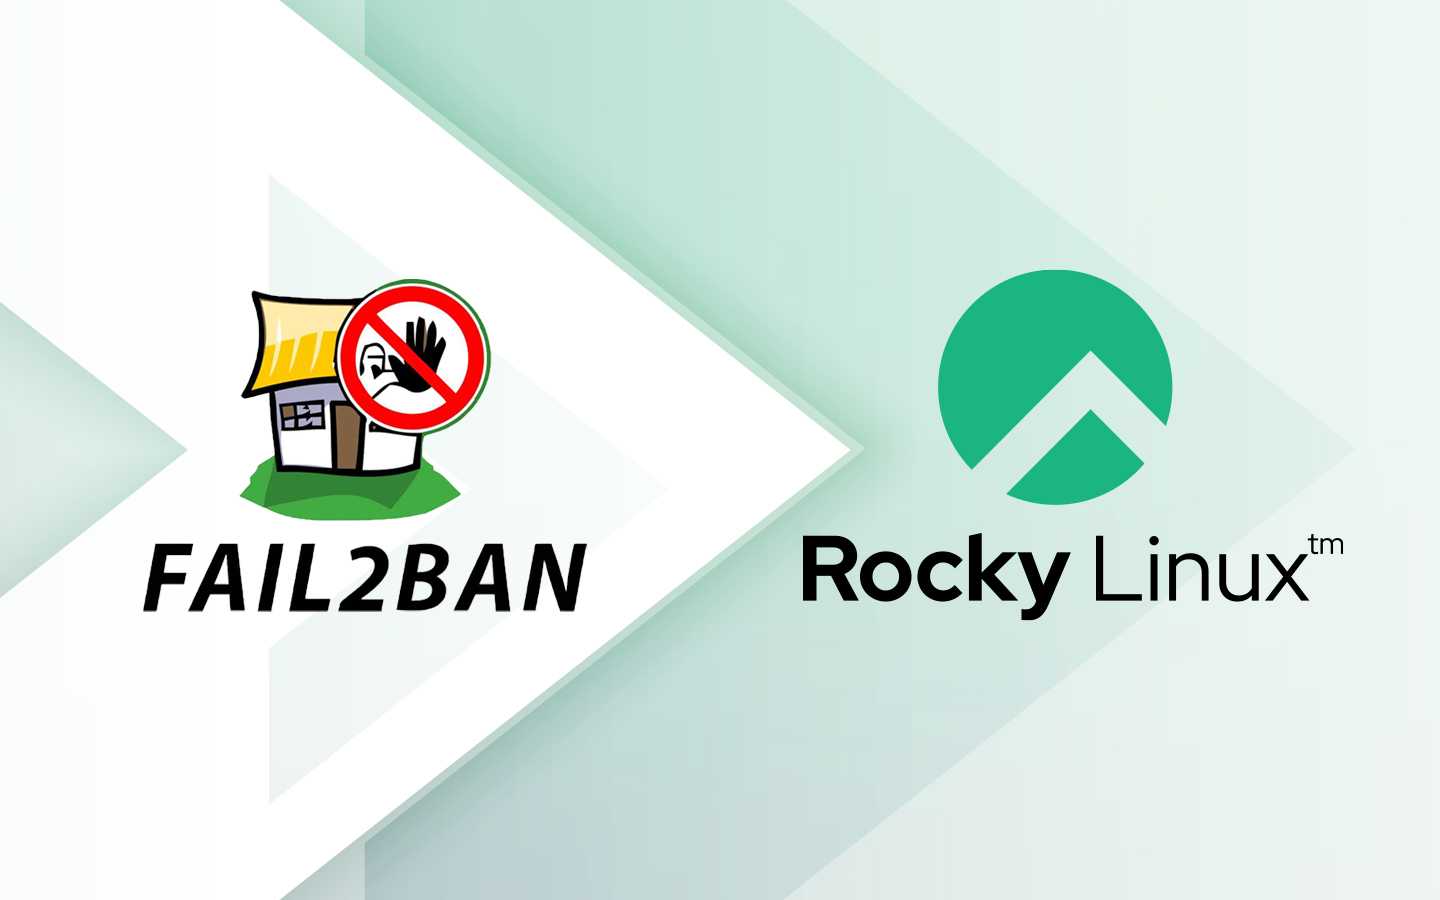 Installing fail2ban to Protect Rocky Linux from SSH Attacks